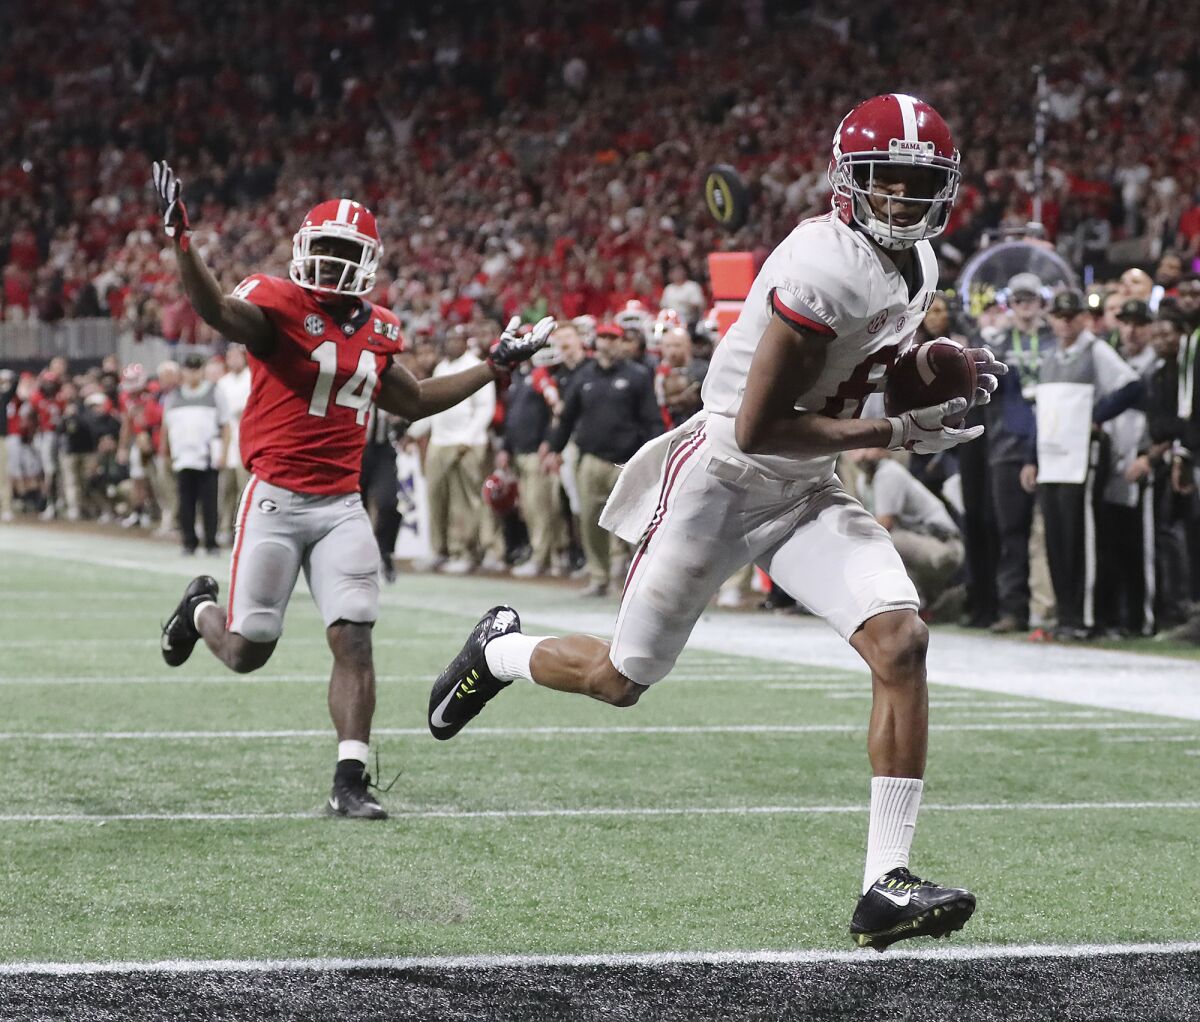 FILE - Alabama wide receiver Devonta Smith runs into the end zone for a touchdown after catching a pass past Georgia defensive back Malkom Parrish during overtime of the NCAA college football playoff championship game in Atlanta on Monday, Jan. 8, 2018. Alabama won 26-23. (Curtis Compton/Atlanta Journal-Constitution via AP, File)